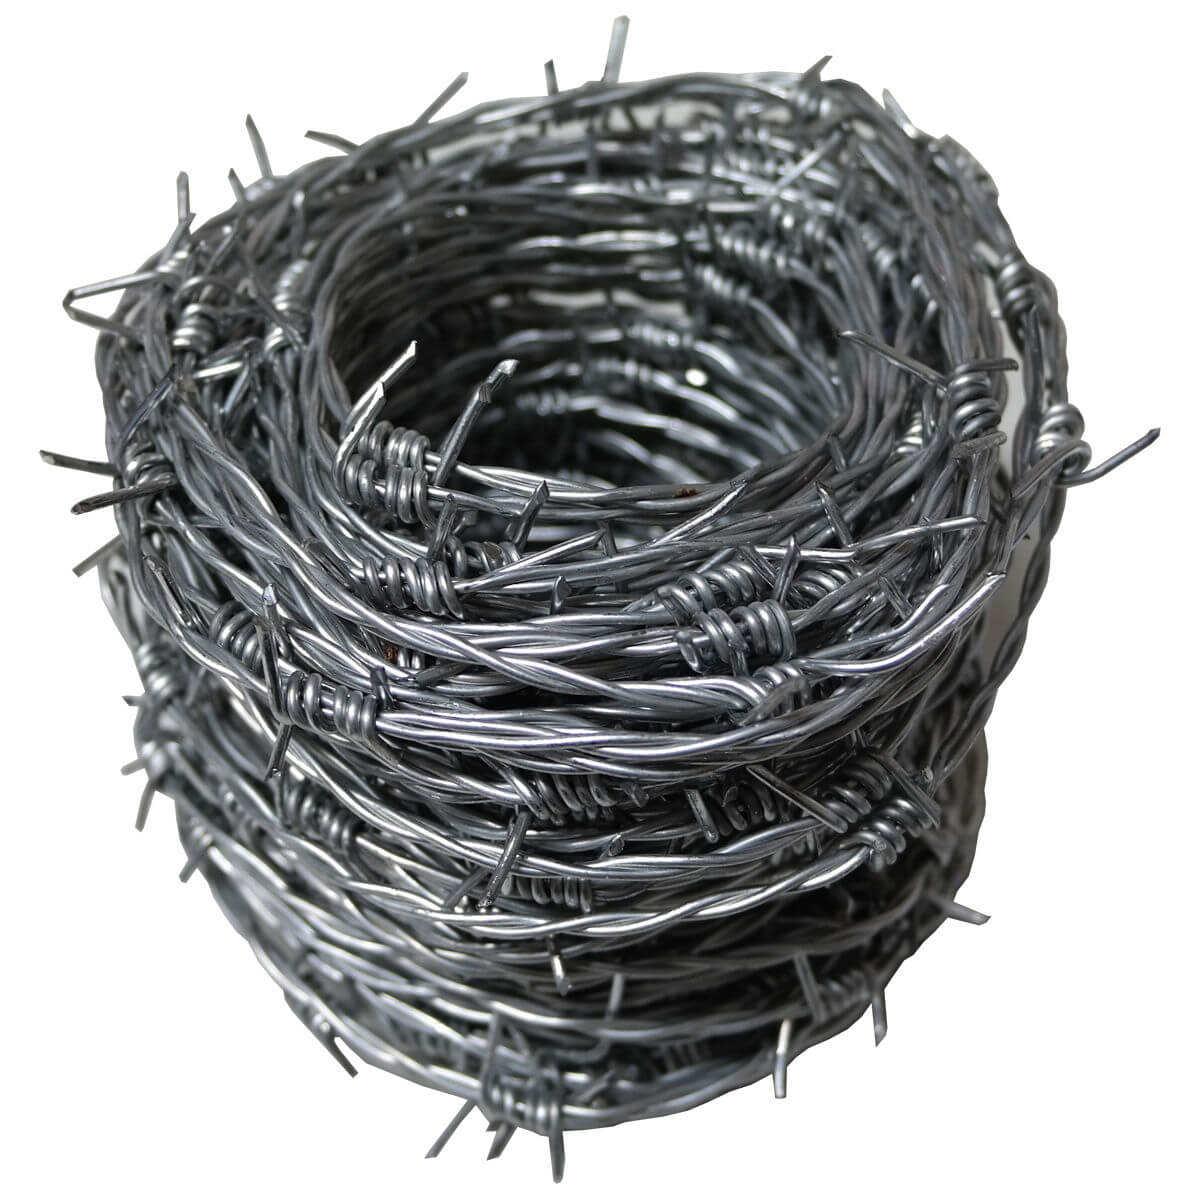 The Durability of Fencing Wire: A Wise Choice for Security